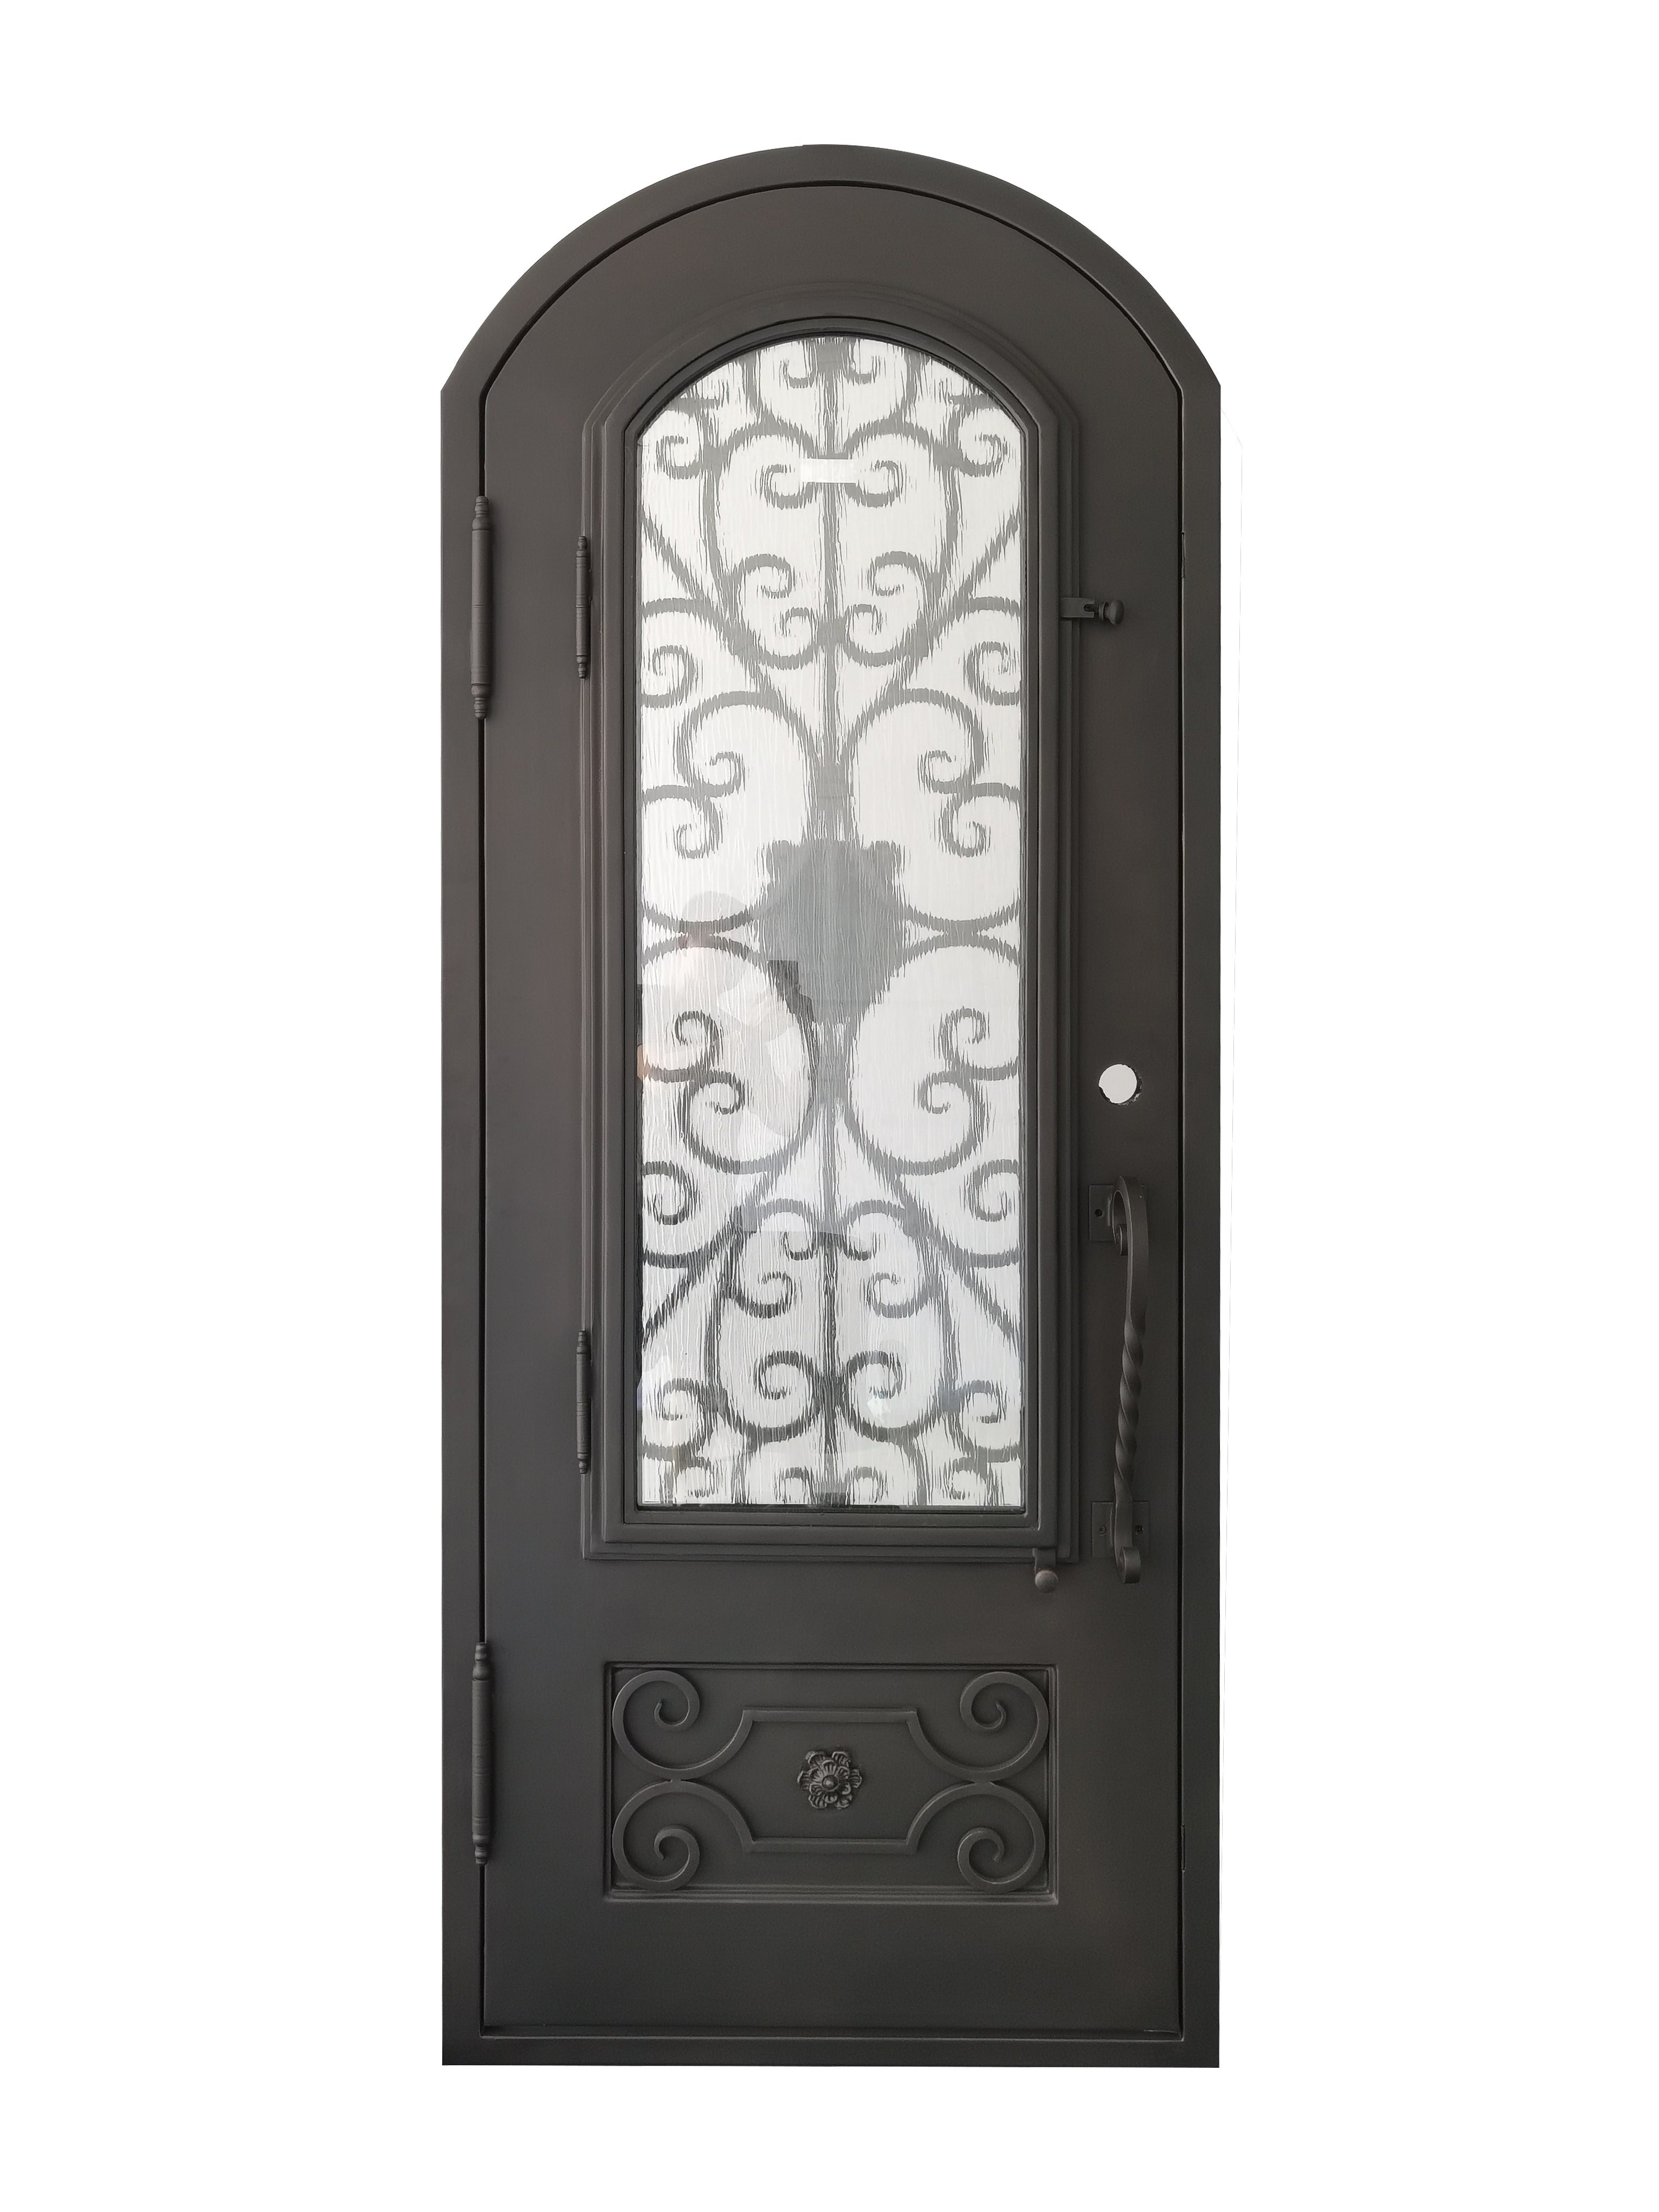 Princeton Model Pre Hung Single Front Entry Wrought Iron Door With Rain Glass Dark Bronze Finish